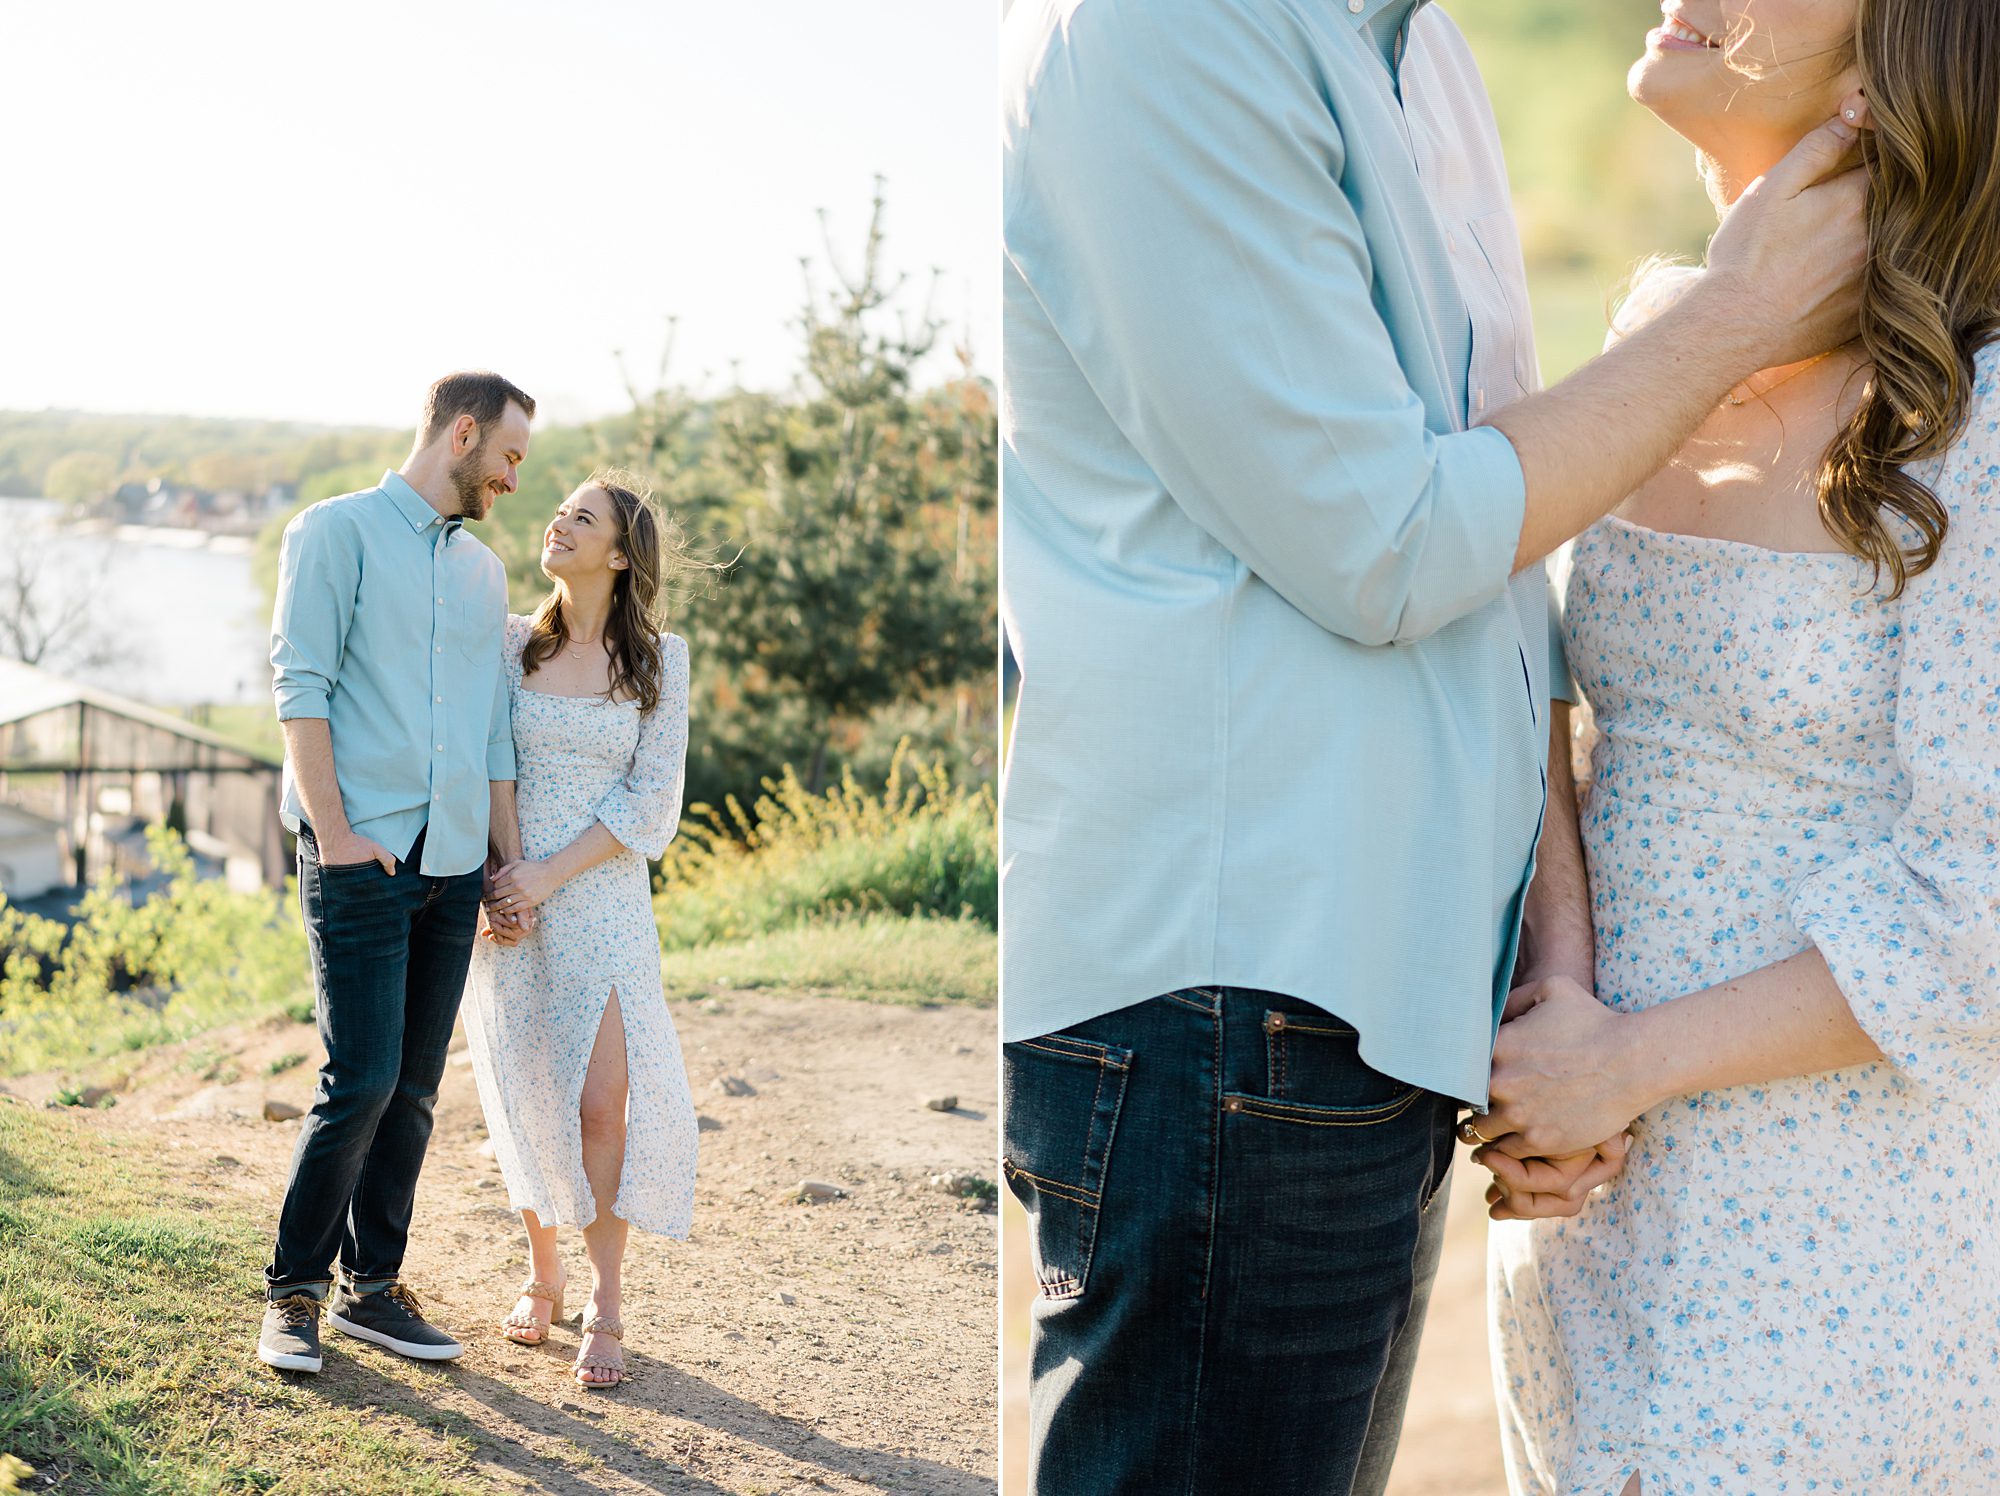 timeless engagement portaits by Light + Airy Philadelphia Engagement photographer, Amber Dawn Photography